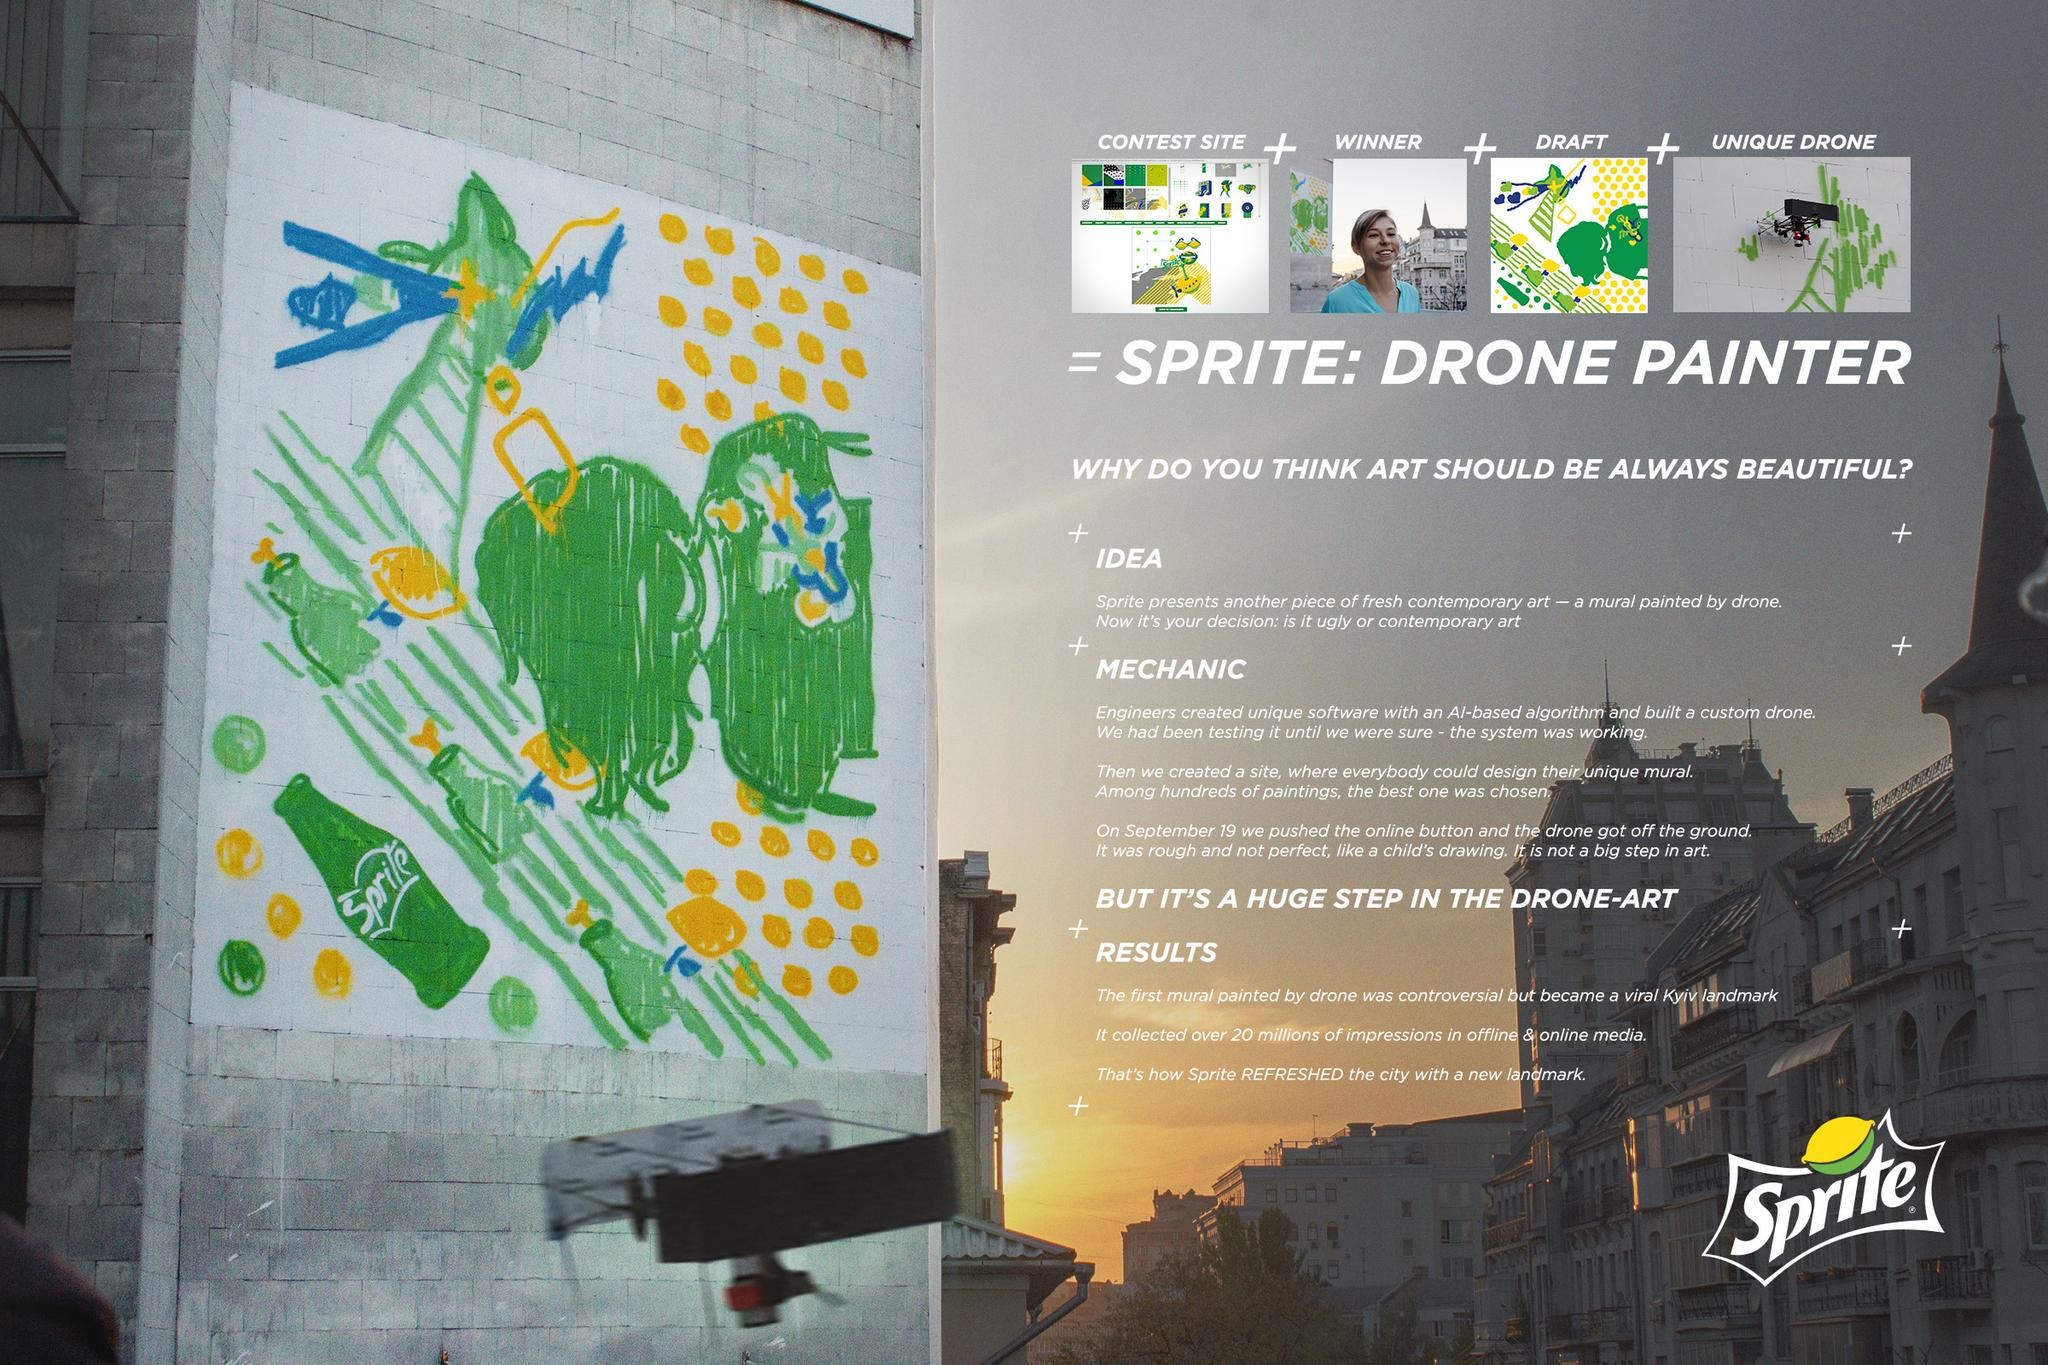 Sprite: DRONE PAINTER - Ugly or Contemporary artist